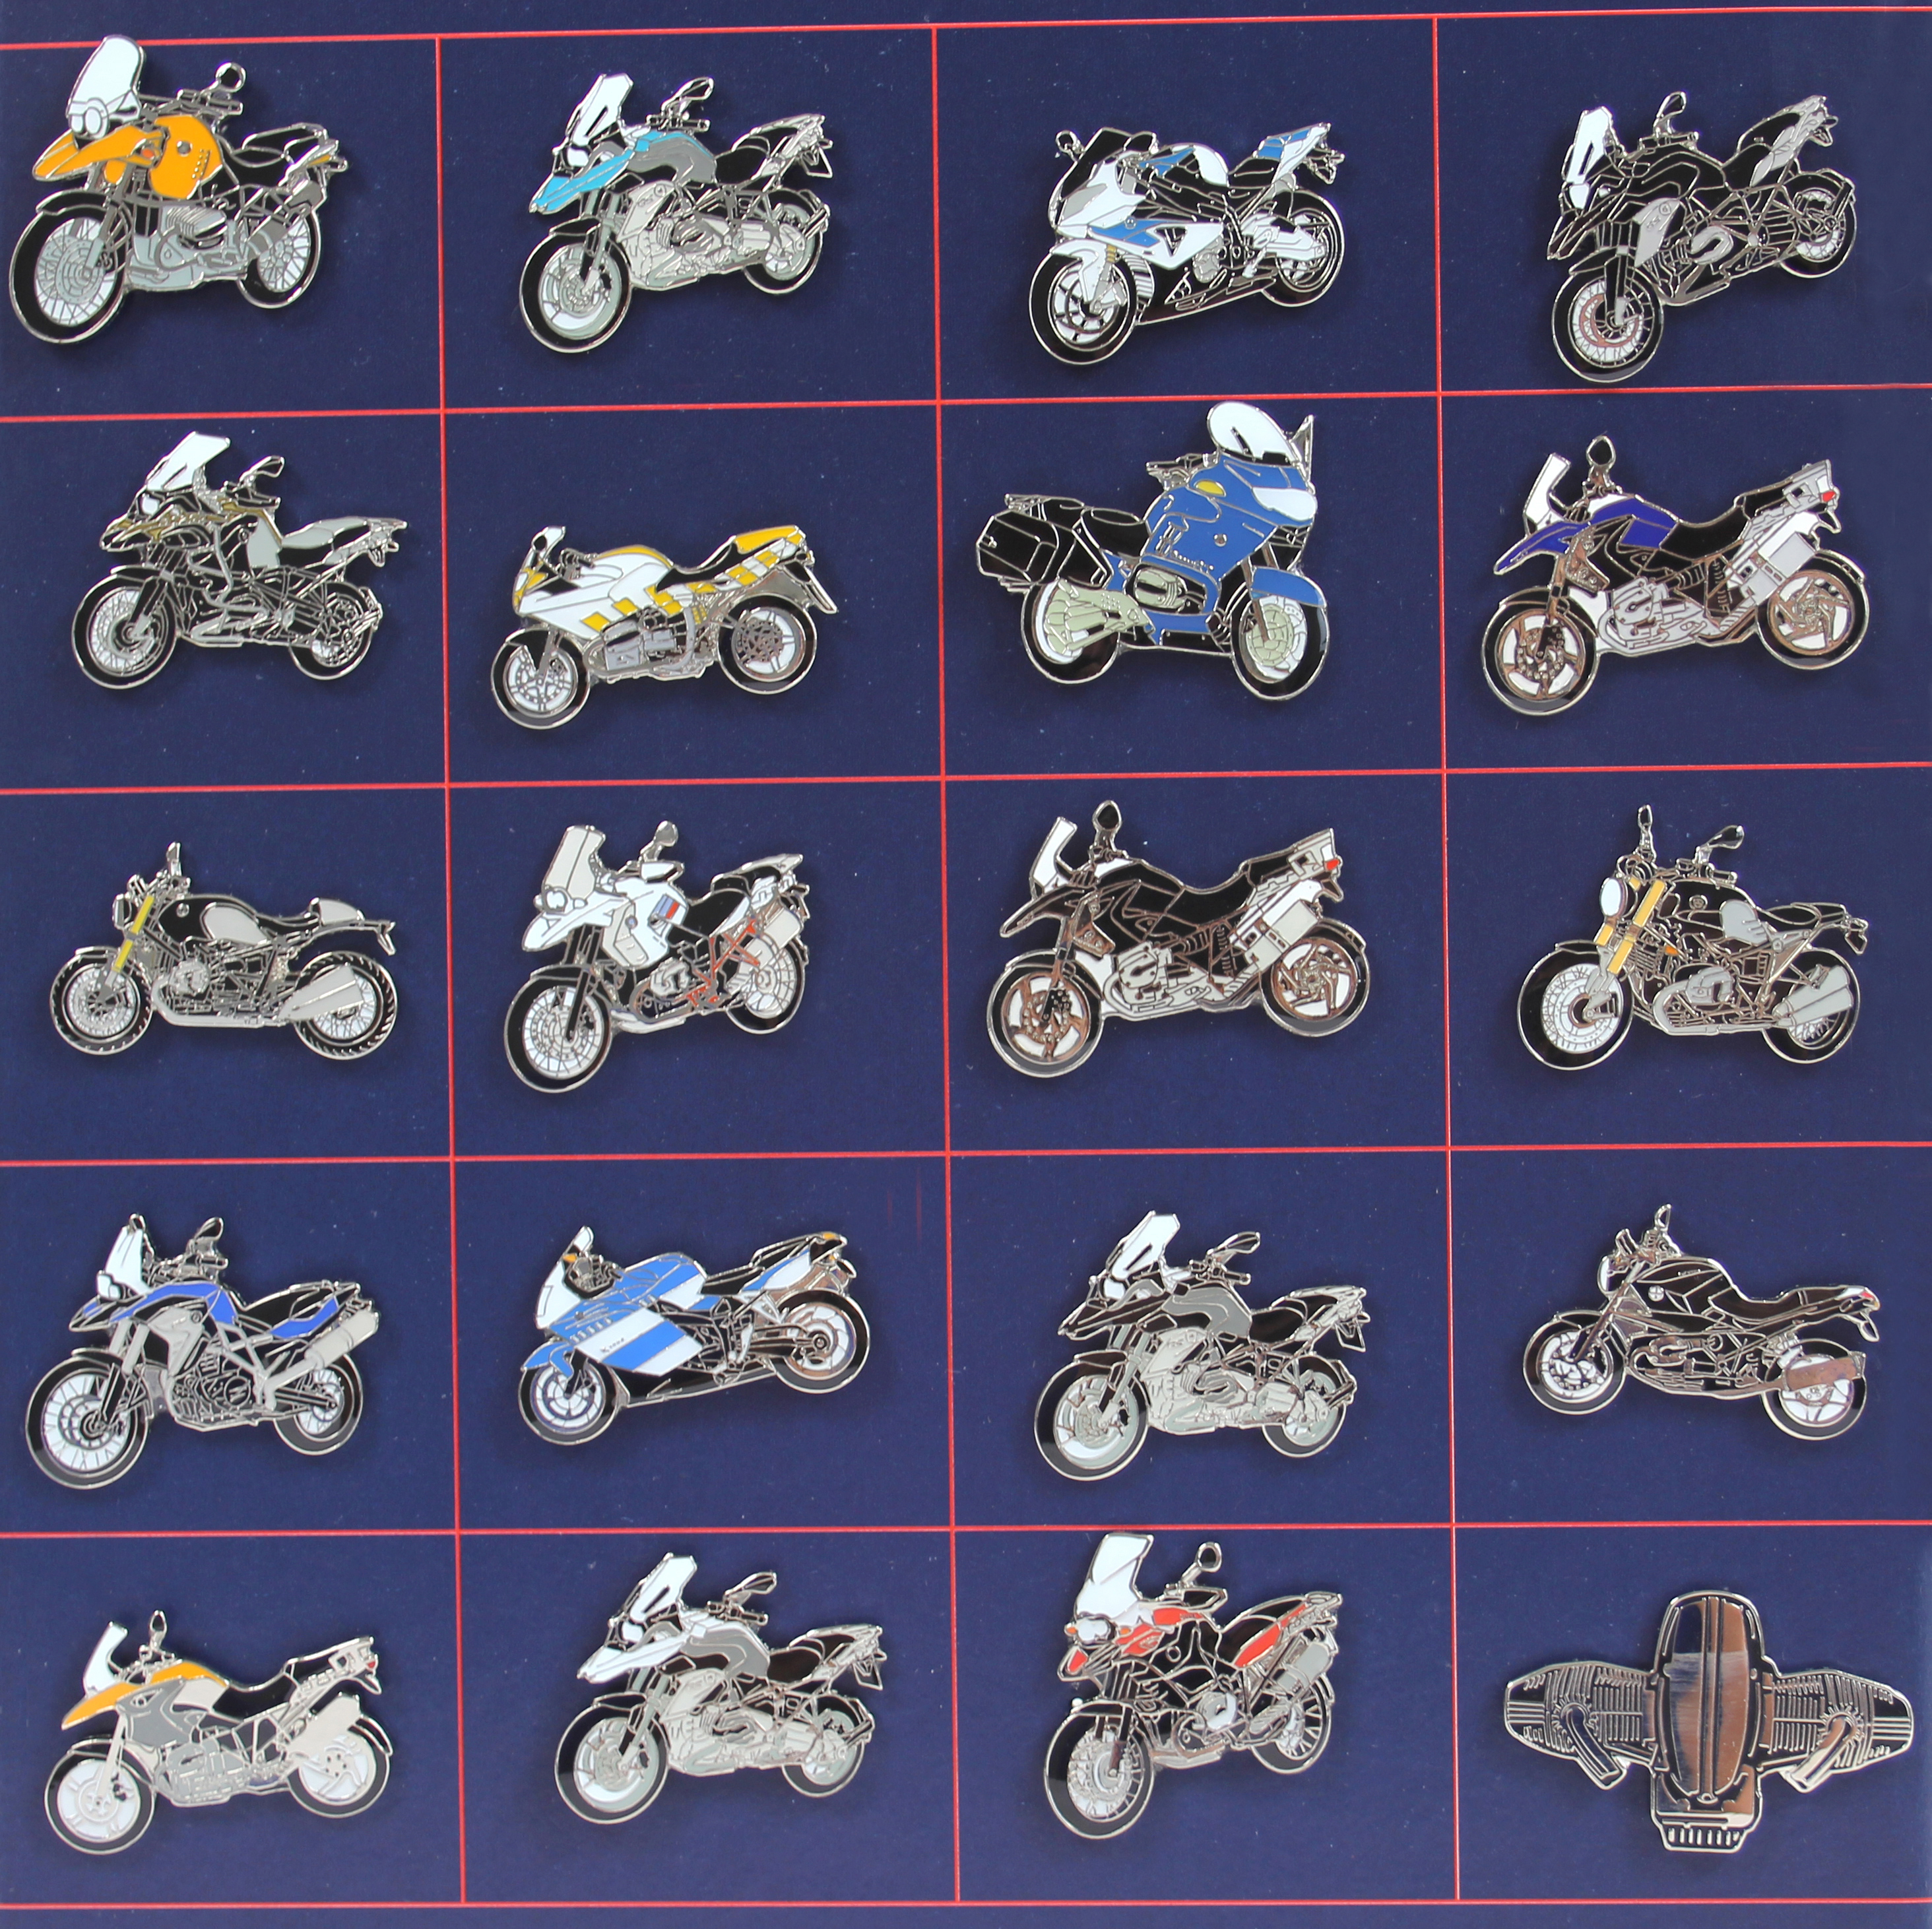 Pins showing your motorcycle for many BMW motorcycle models